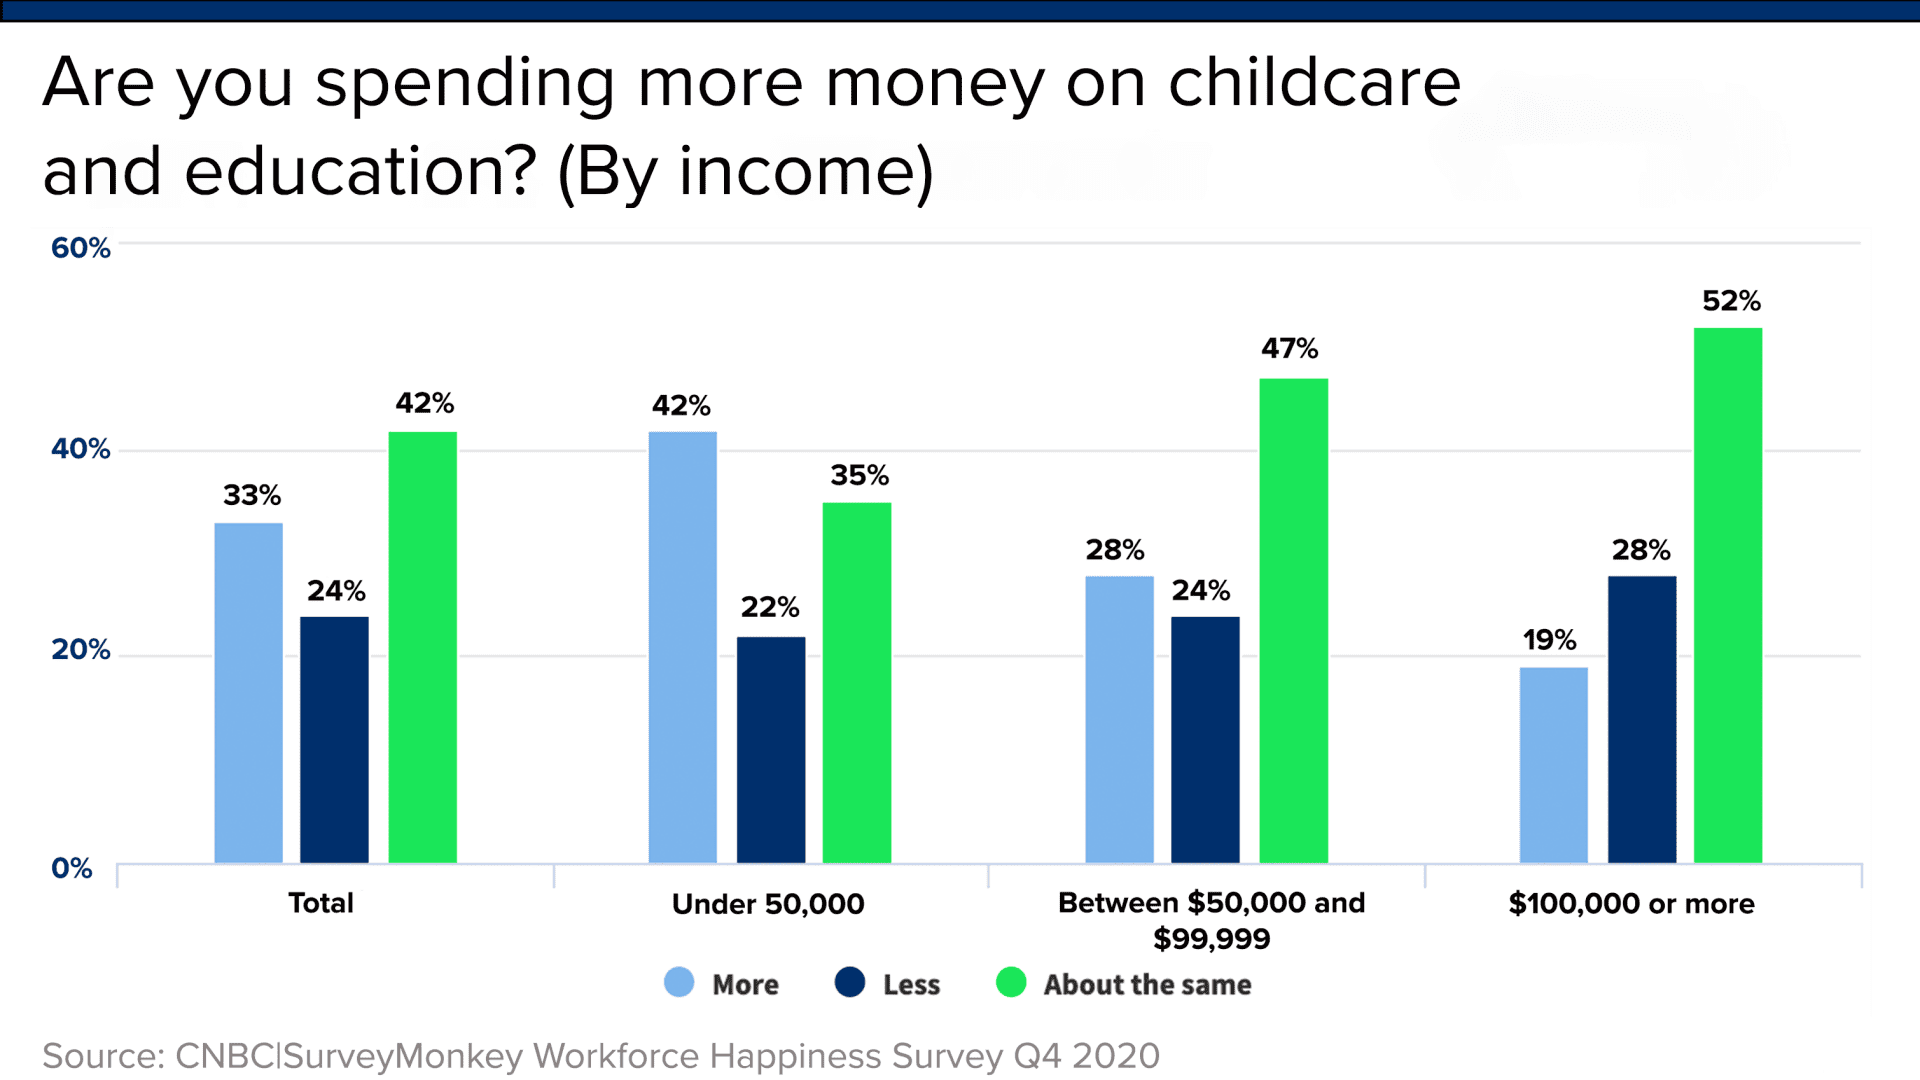 Working parents at the lowest income levels are the ones most likely to be spending more onchildcare and education during Covid-19, according to a new CNBC|SurveyMonkey national workforce study.